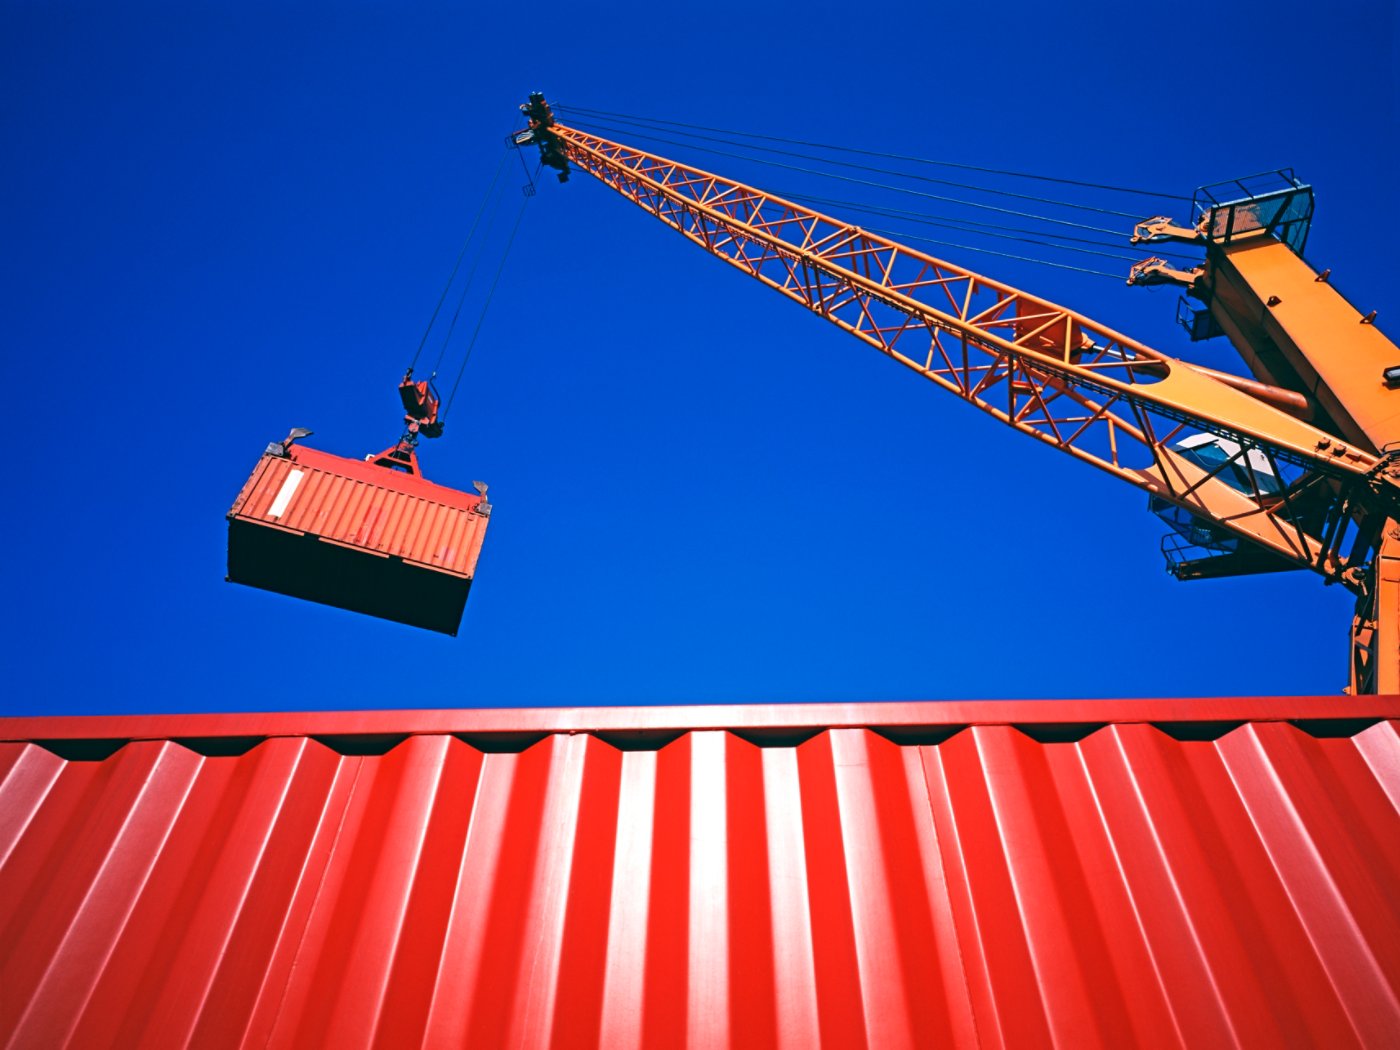 Crane lifting a cargo container at a freight terminal.  Istanbul, Turkey